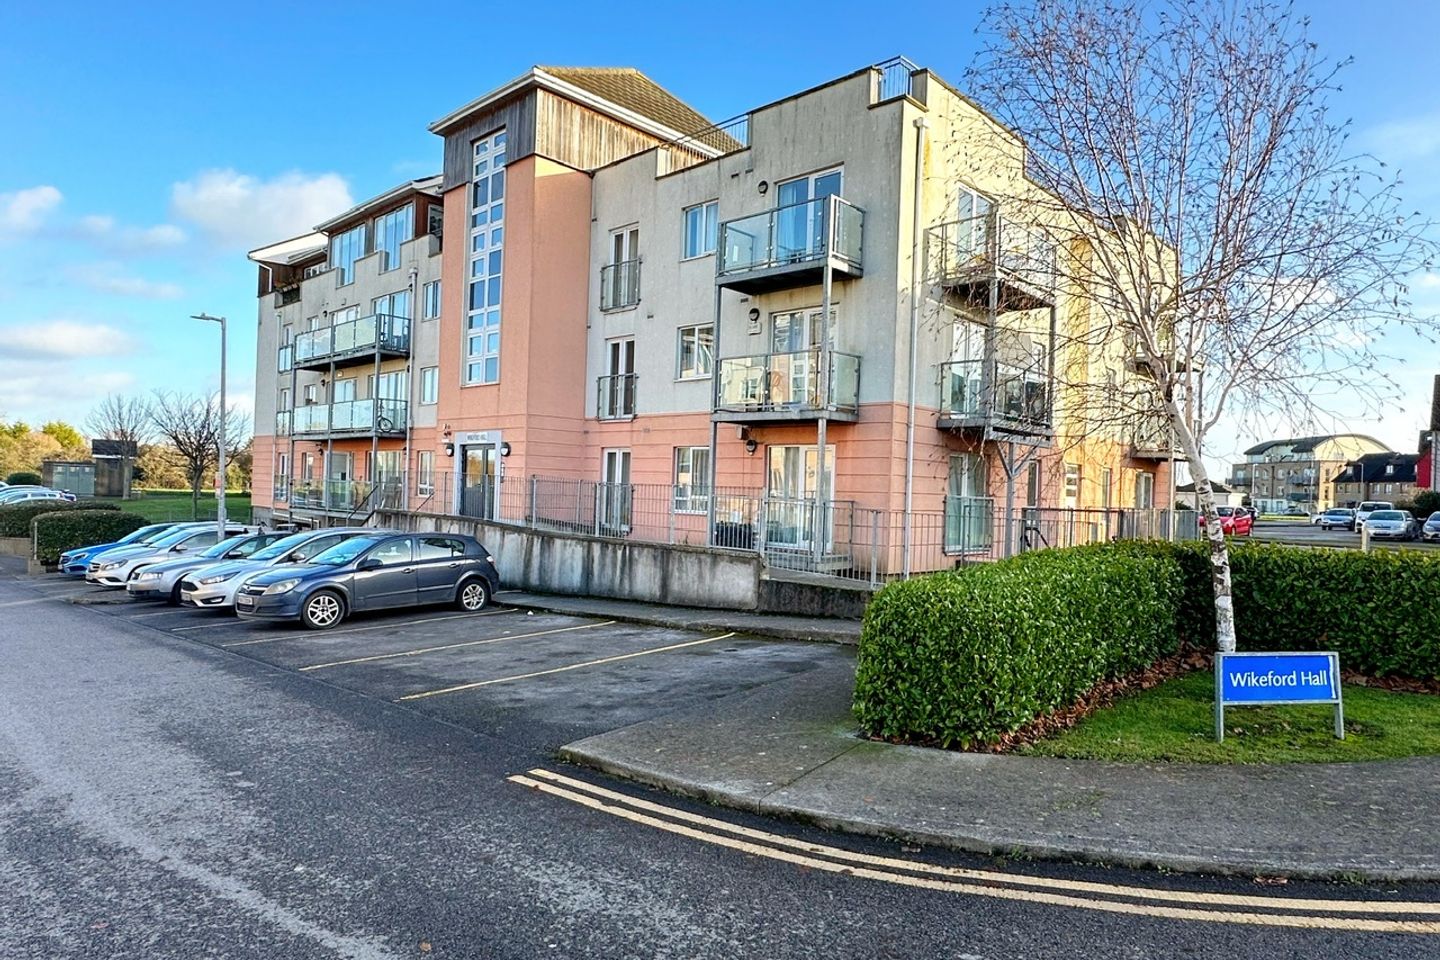 Apartment 2, Wikeford Hall, Thornleigh Road, Swords, Co. Dublin